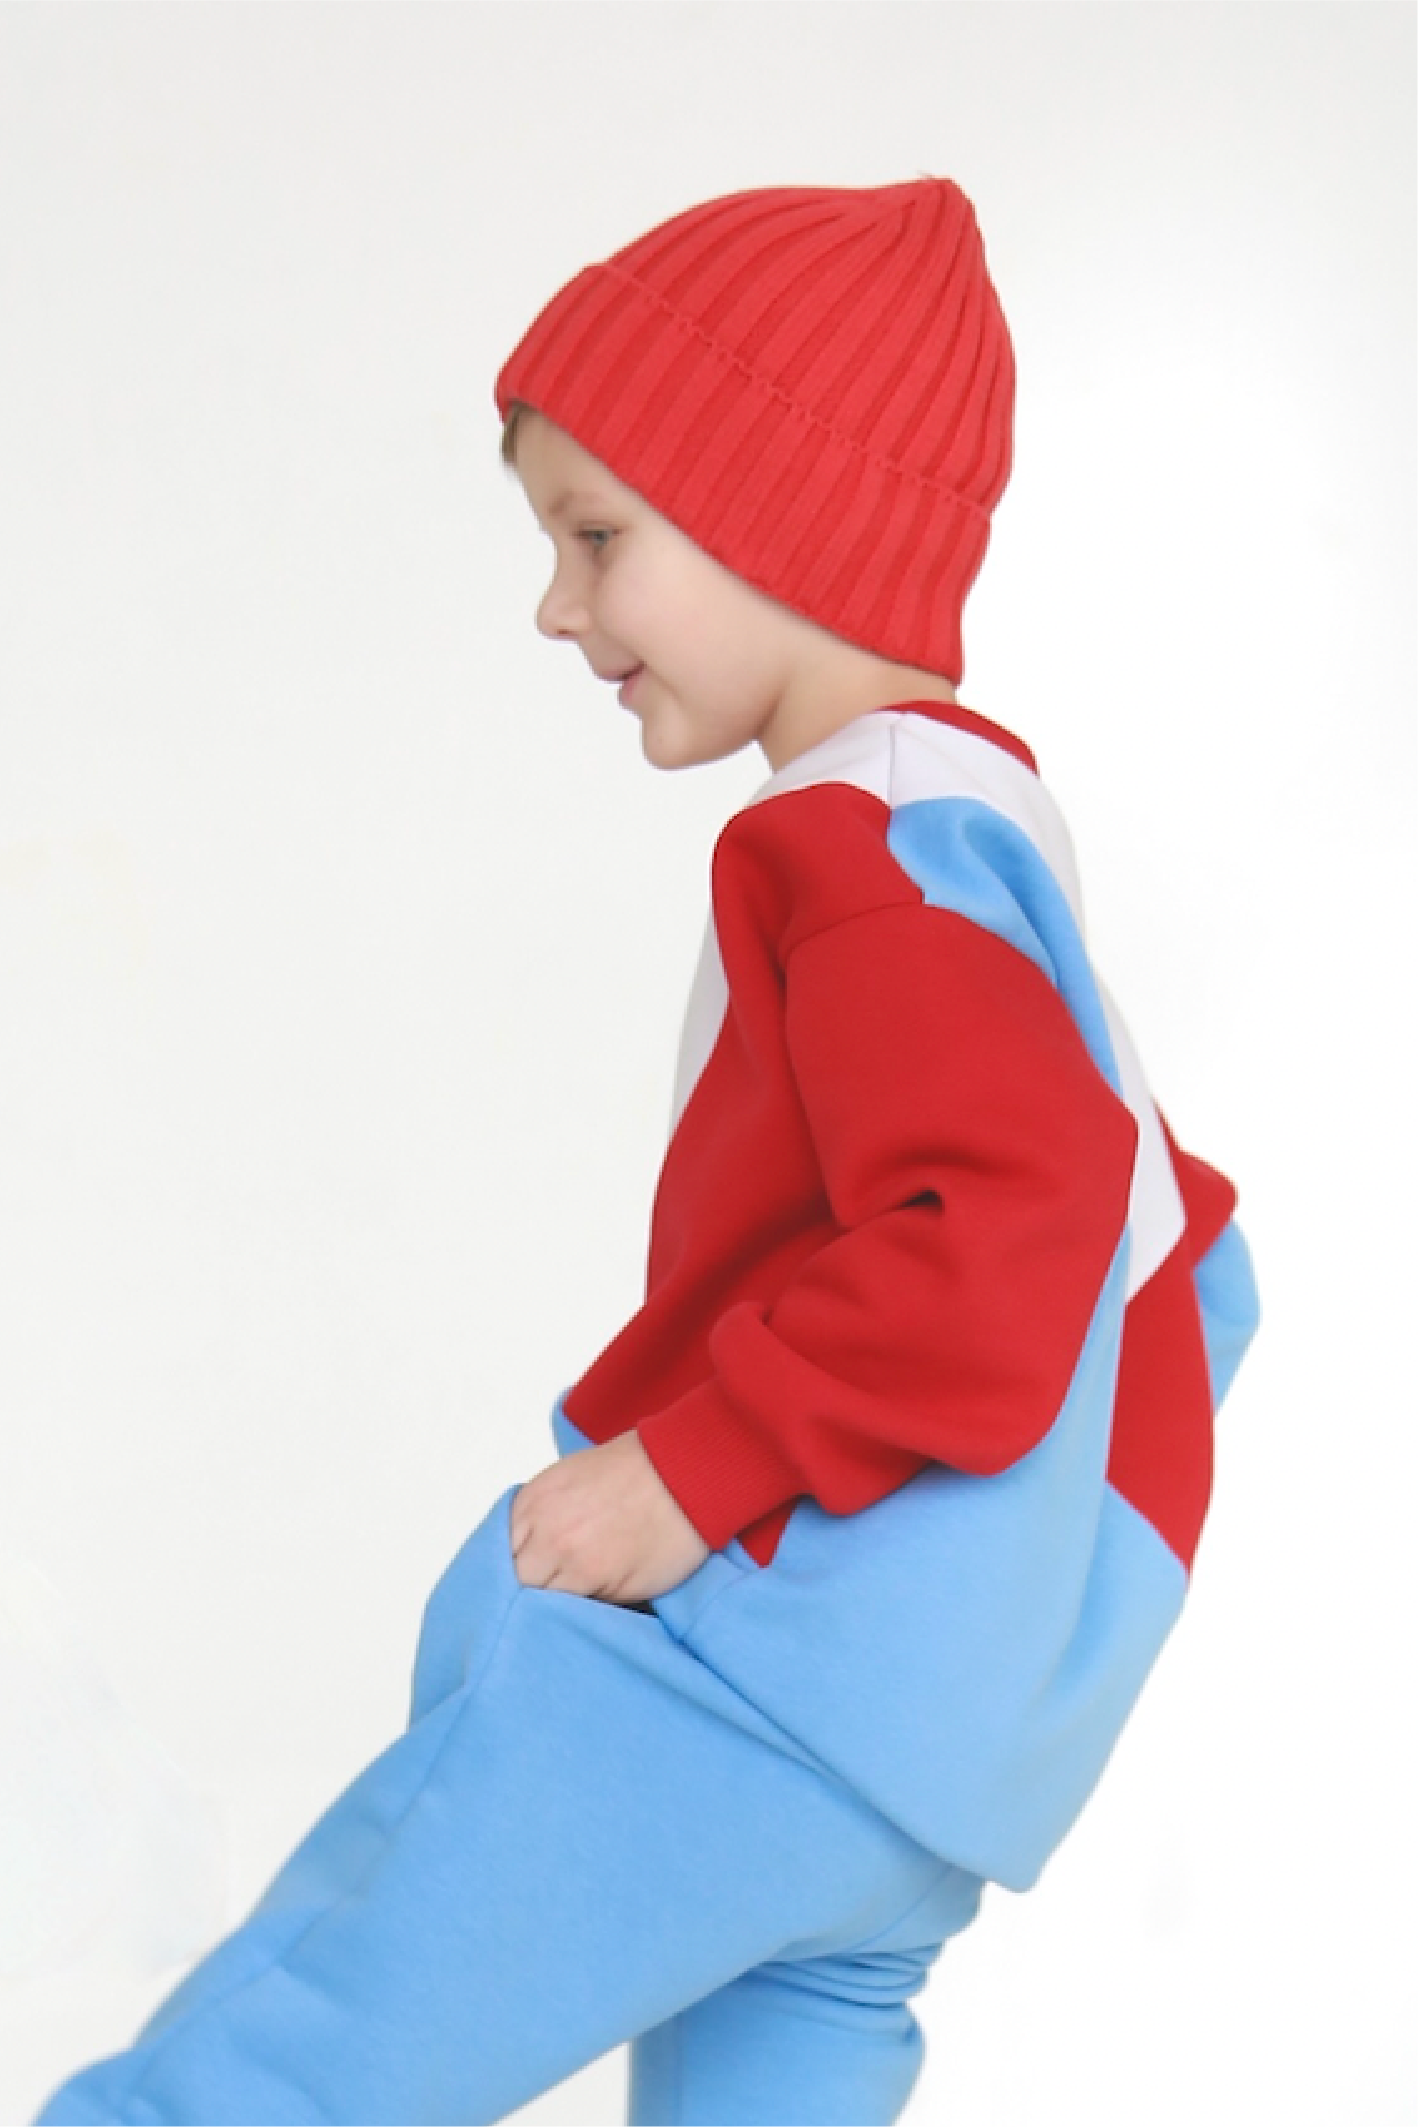 Color blocked sweatshirt with long sleeve and round neckline - PDF sewing pattern for girls and boys - age 1-10 years